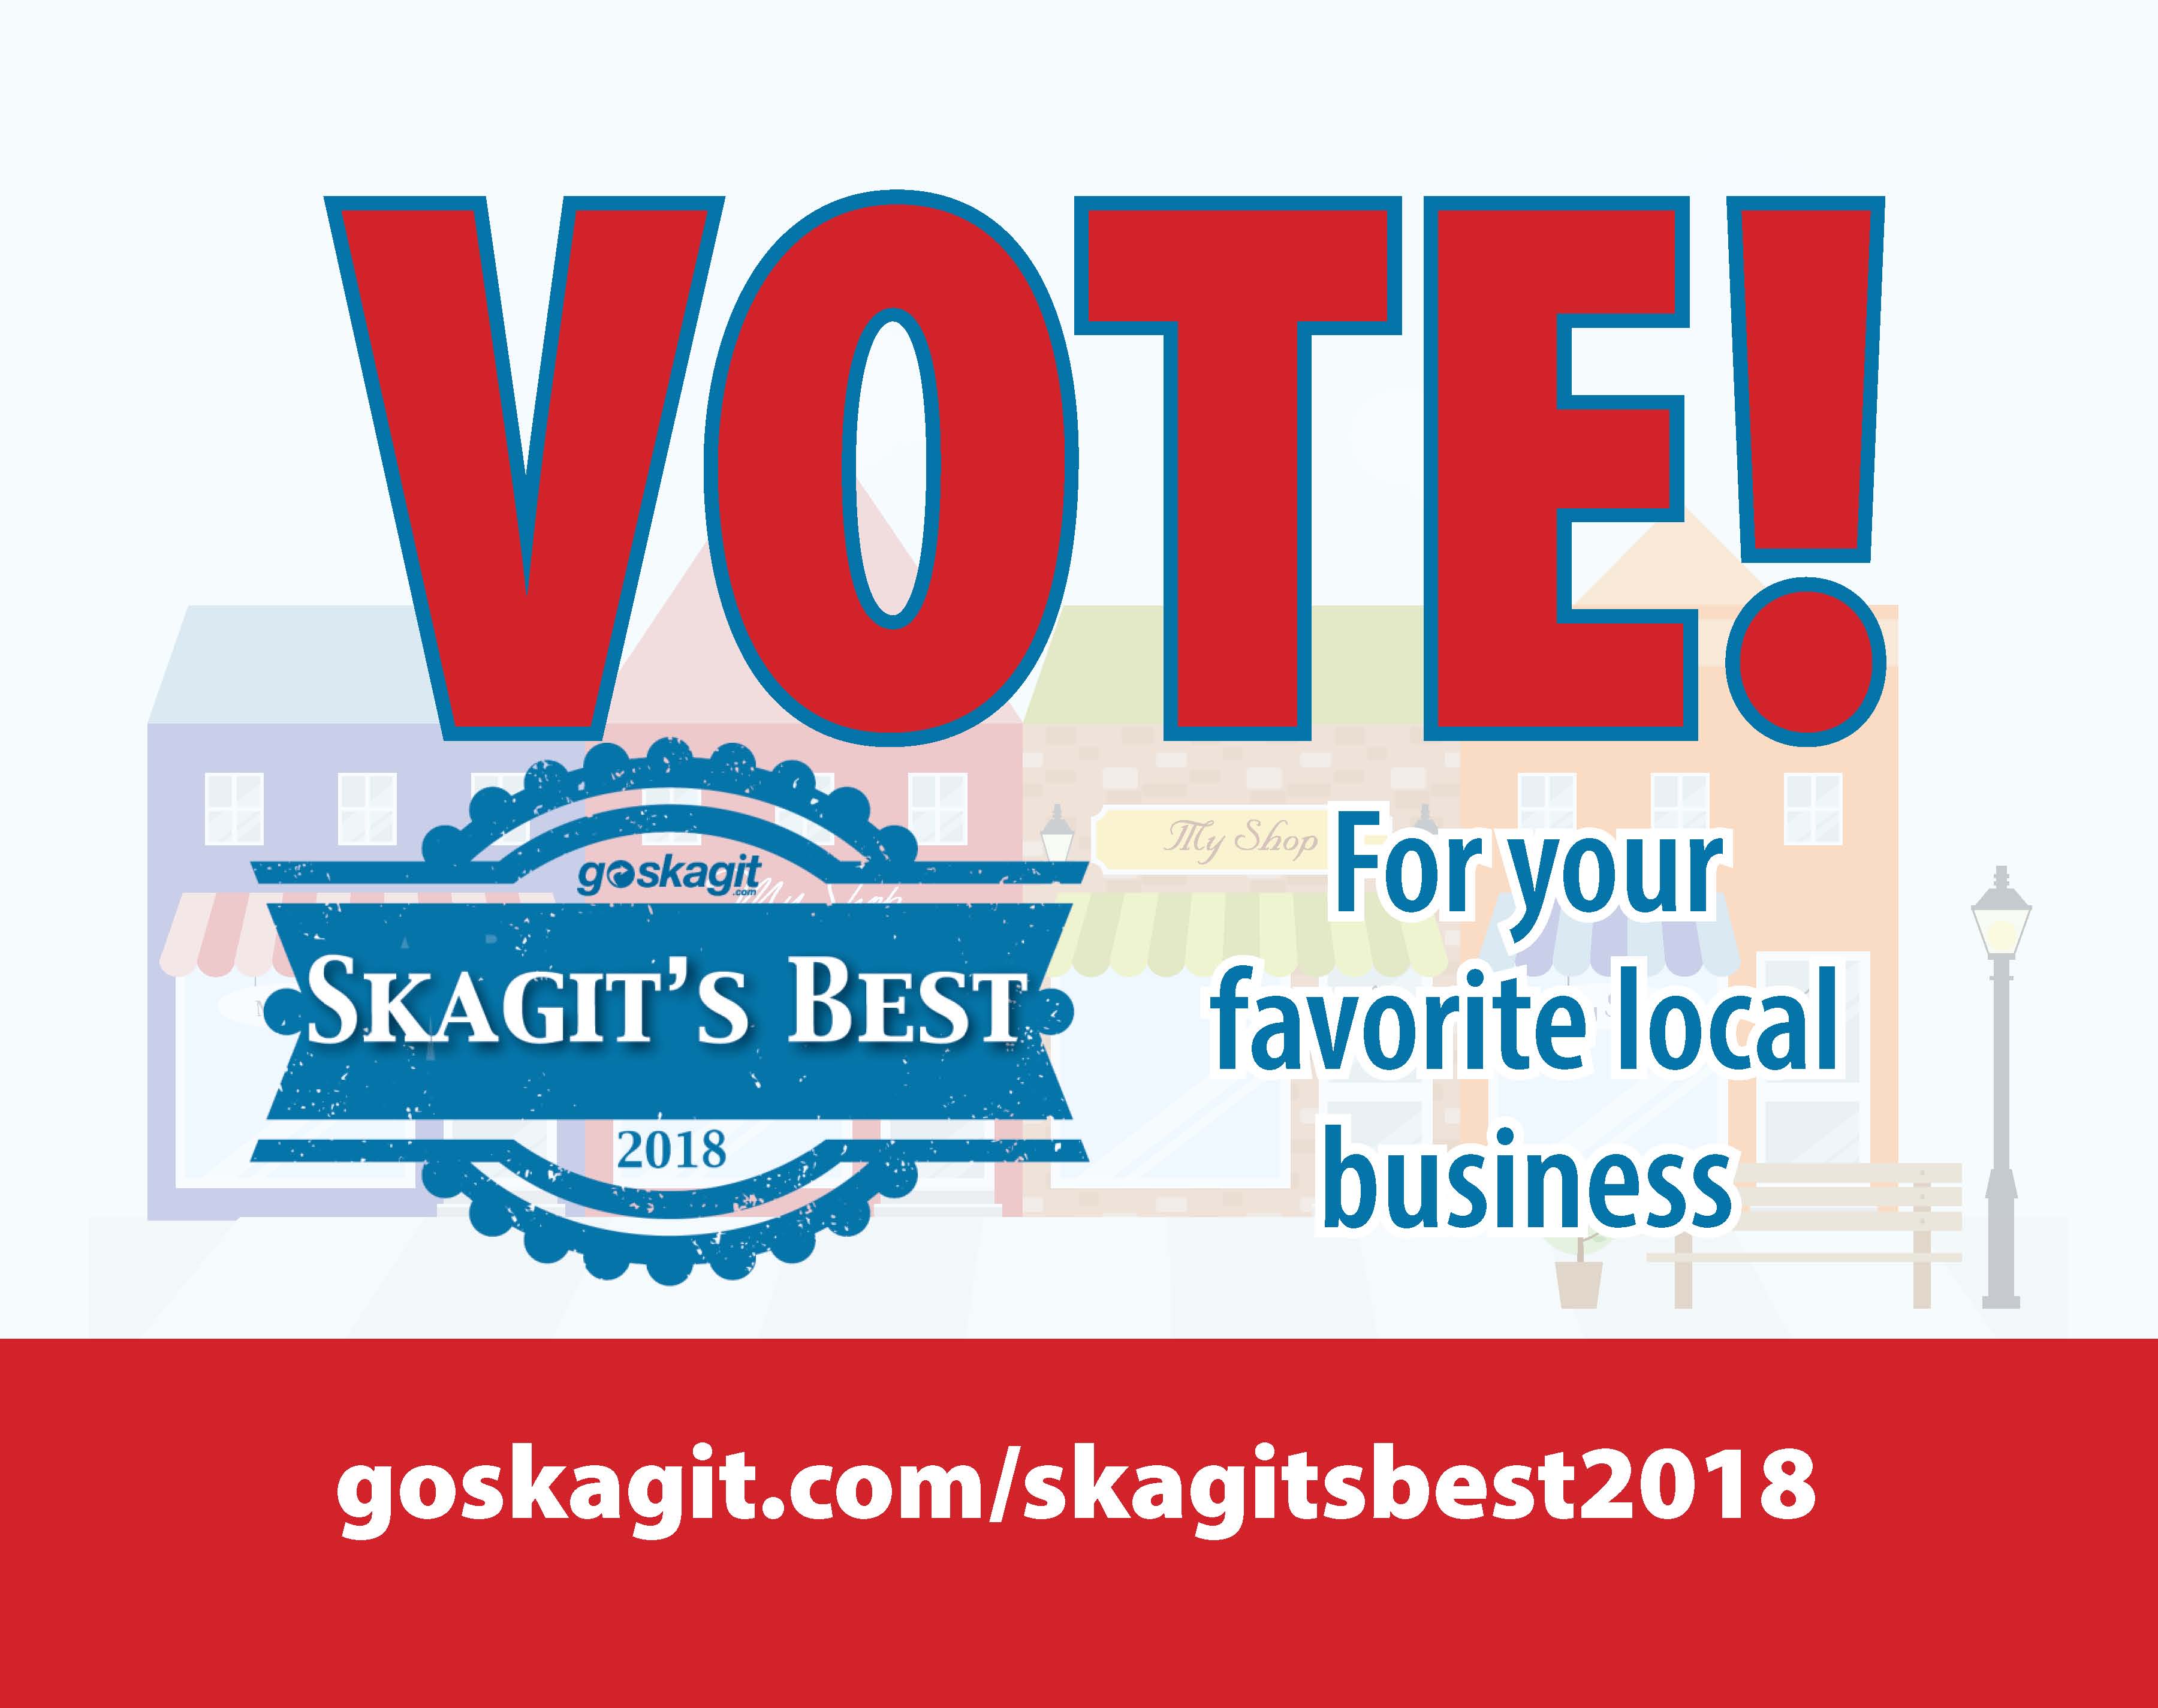 Vote for your favorite local business